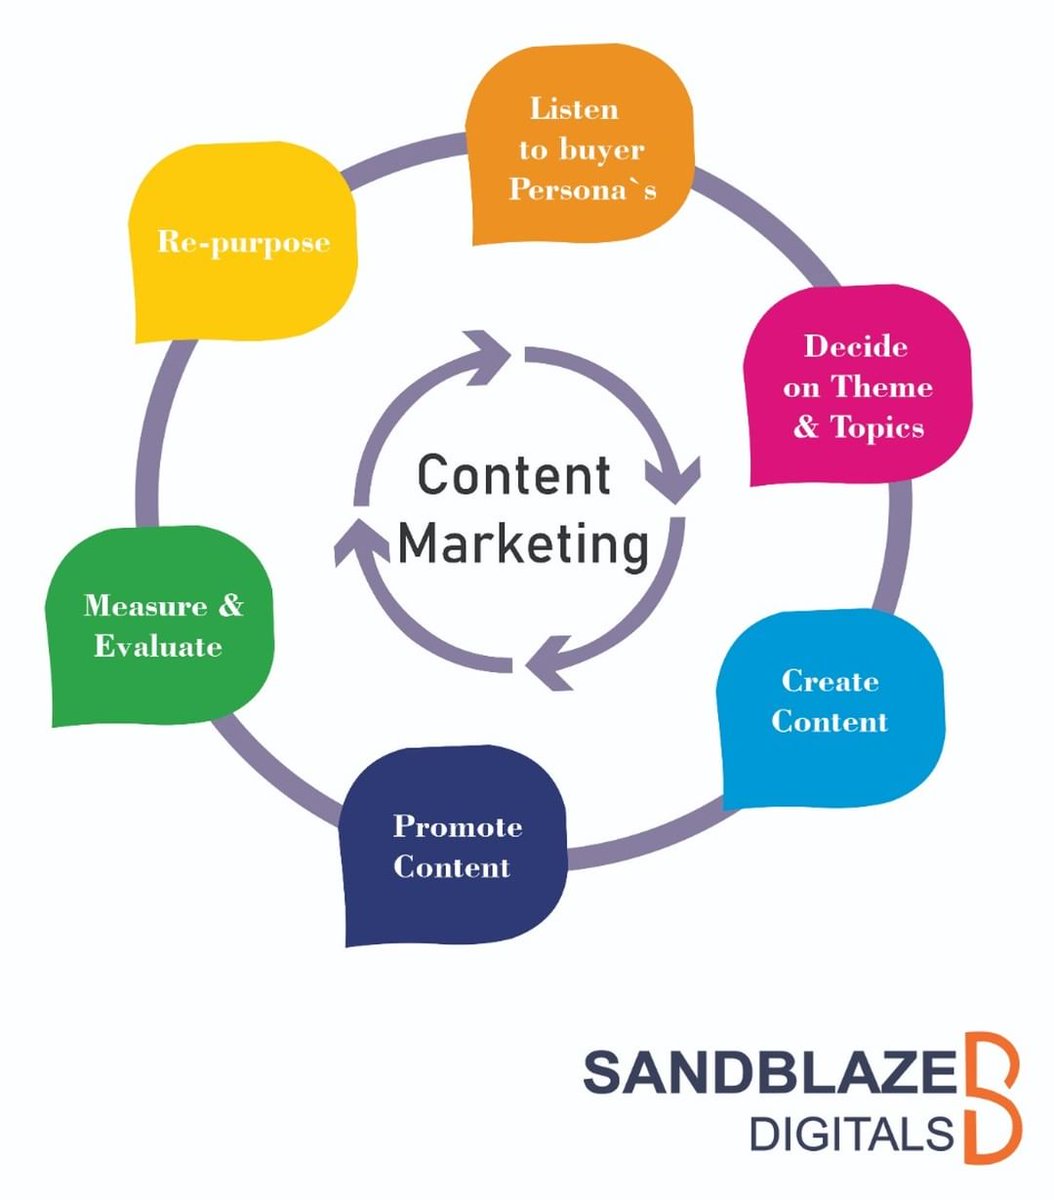 #contentmarketing involves creating and distributing valuable, relevant, and consistent #content to attract and engage a target #audience.

Call: @+91 9390074468
Visit: sandblazedigitals.com

#sandblazedigitals #contentstrategy #contentcreation #contentpromotion #Hyderabad